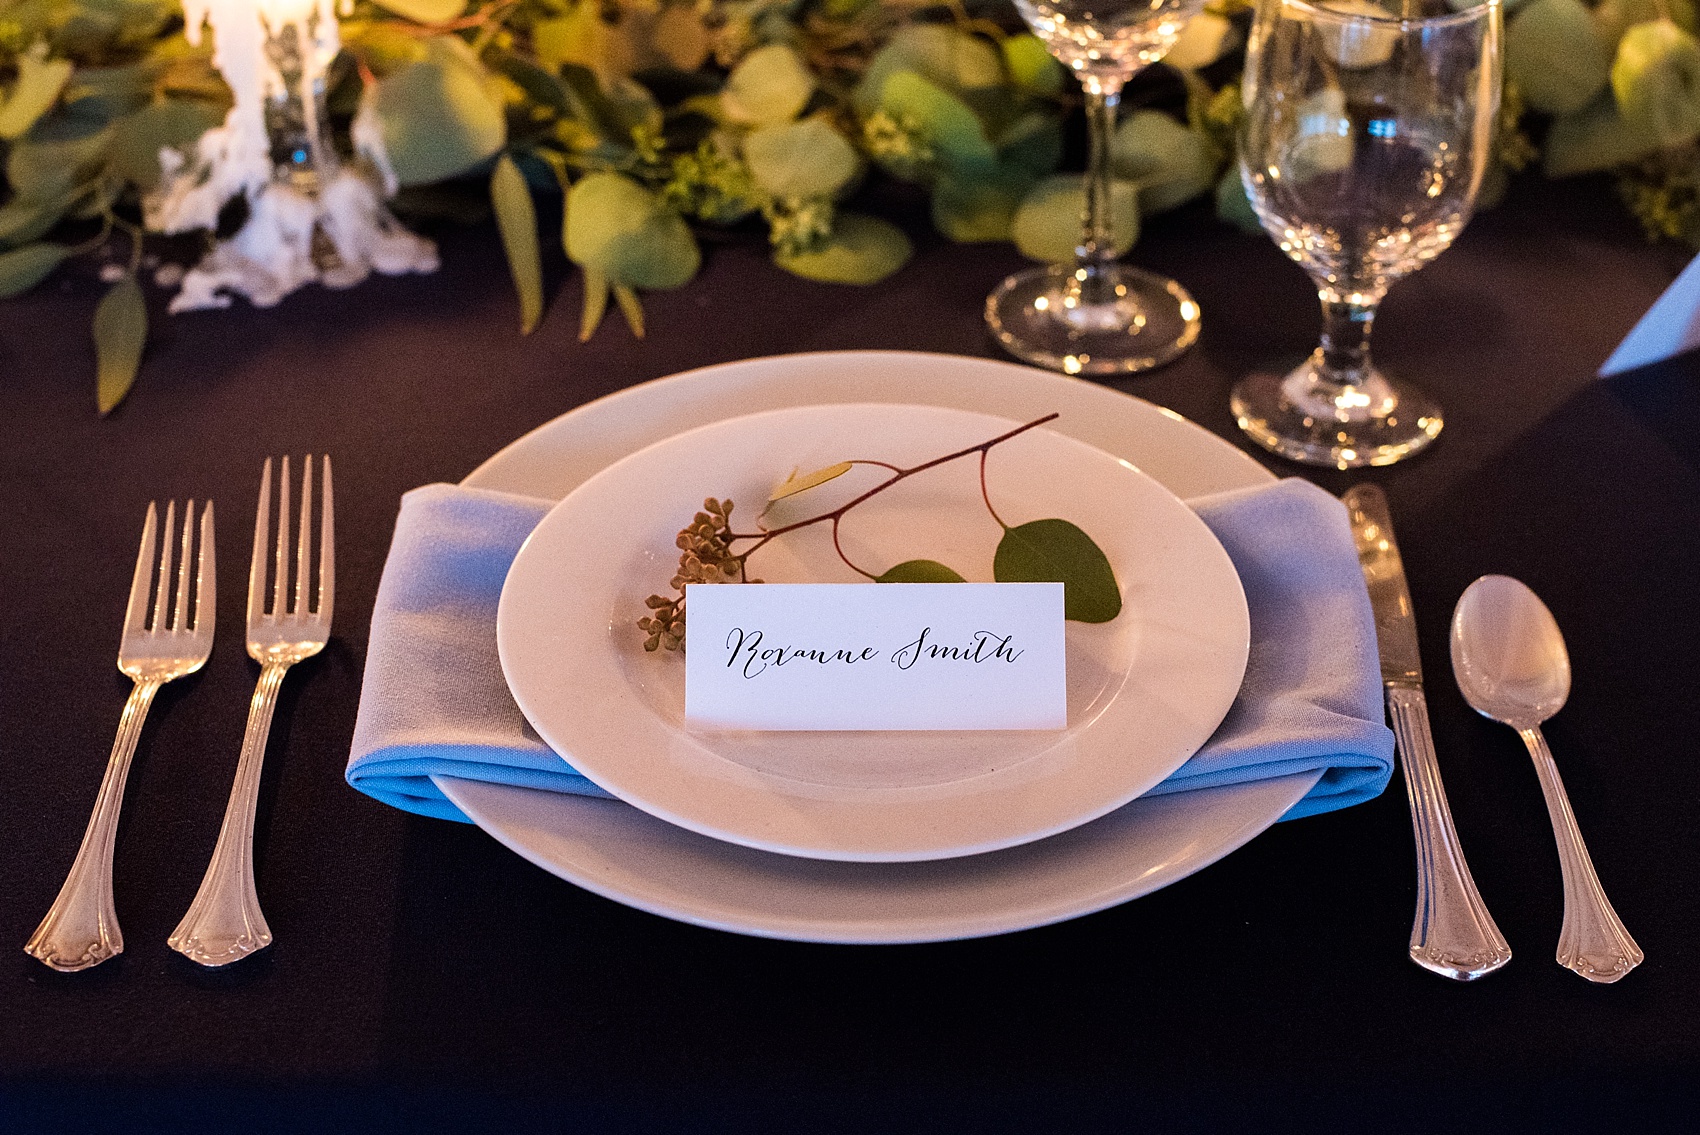 Raleigh North Carolina wedding photographer Mikkel Paige visits Merrimon-Wynne bridal event, featuring Party Reflections rentals and Simply Elegant Floral Design. Calligraphy by One and Only. 